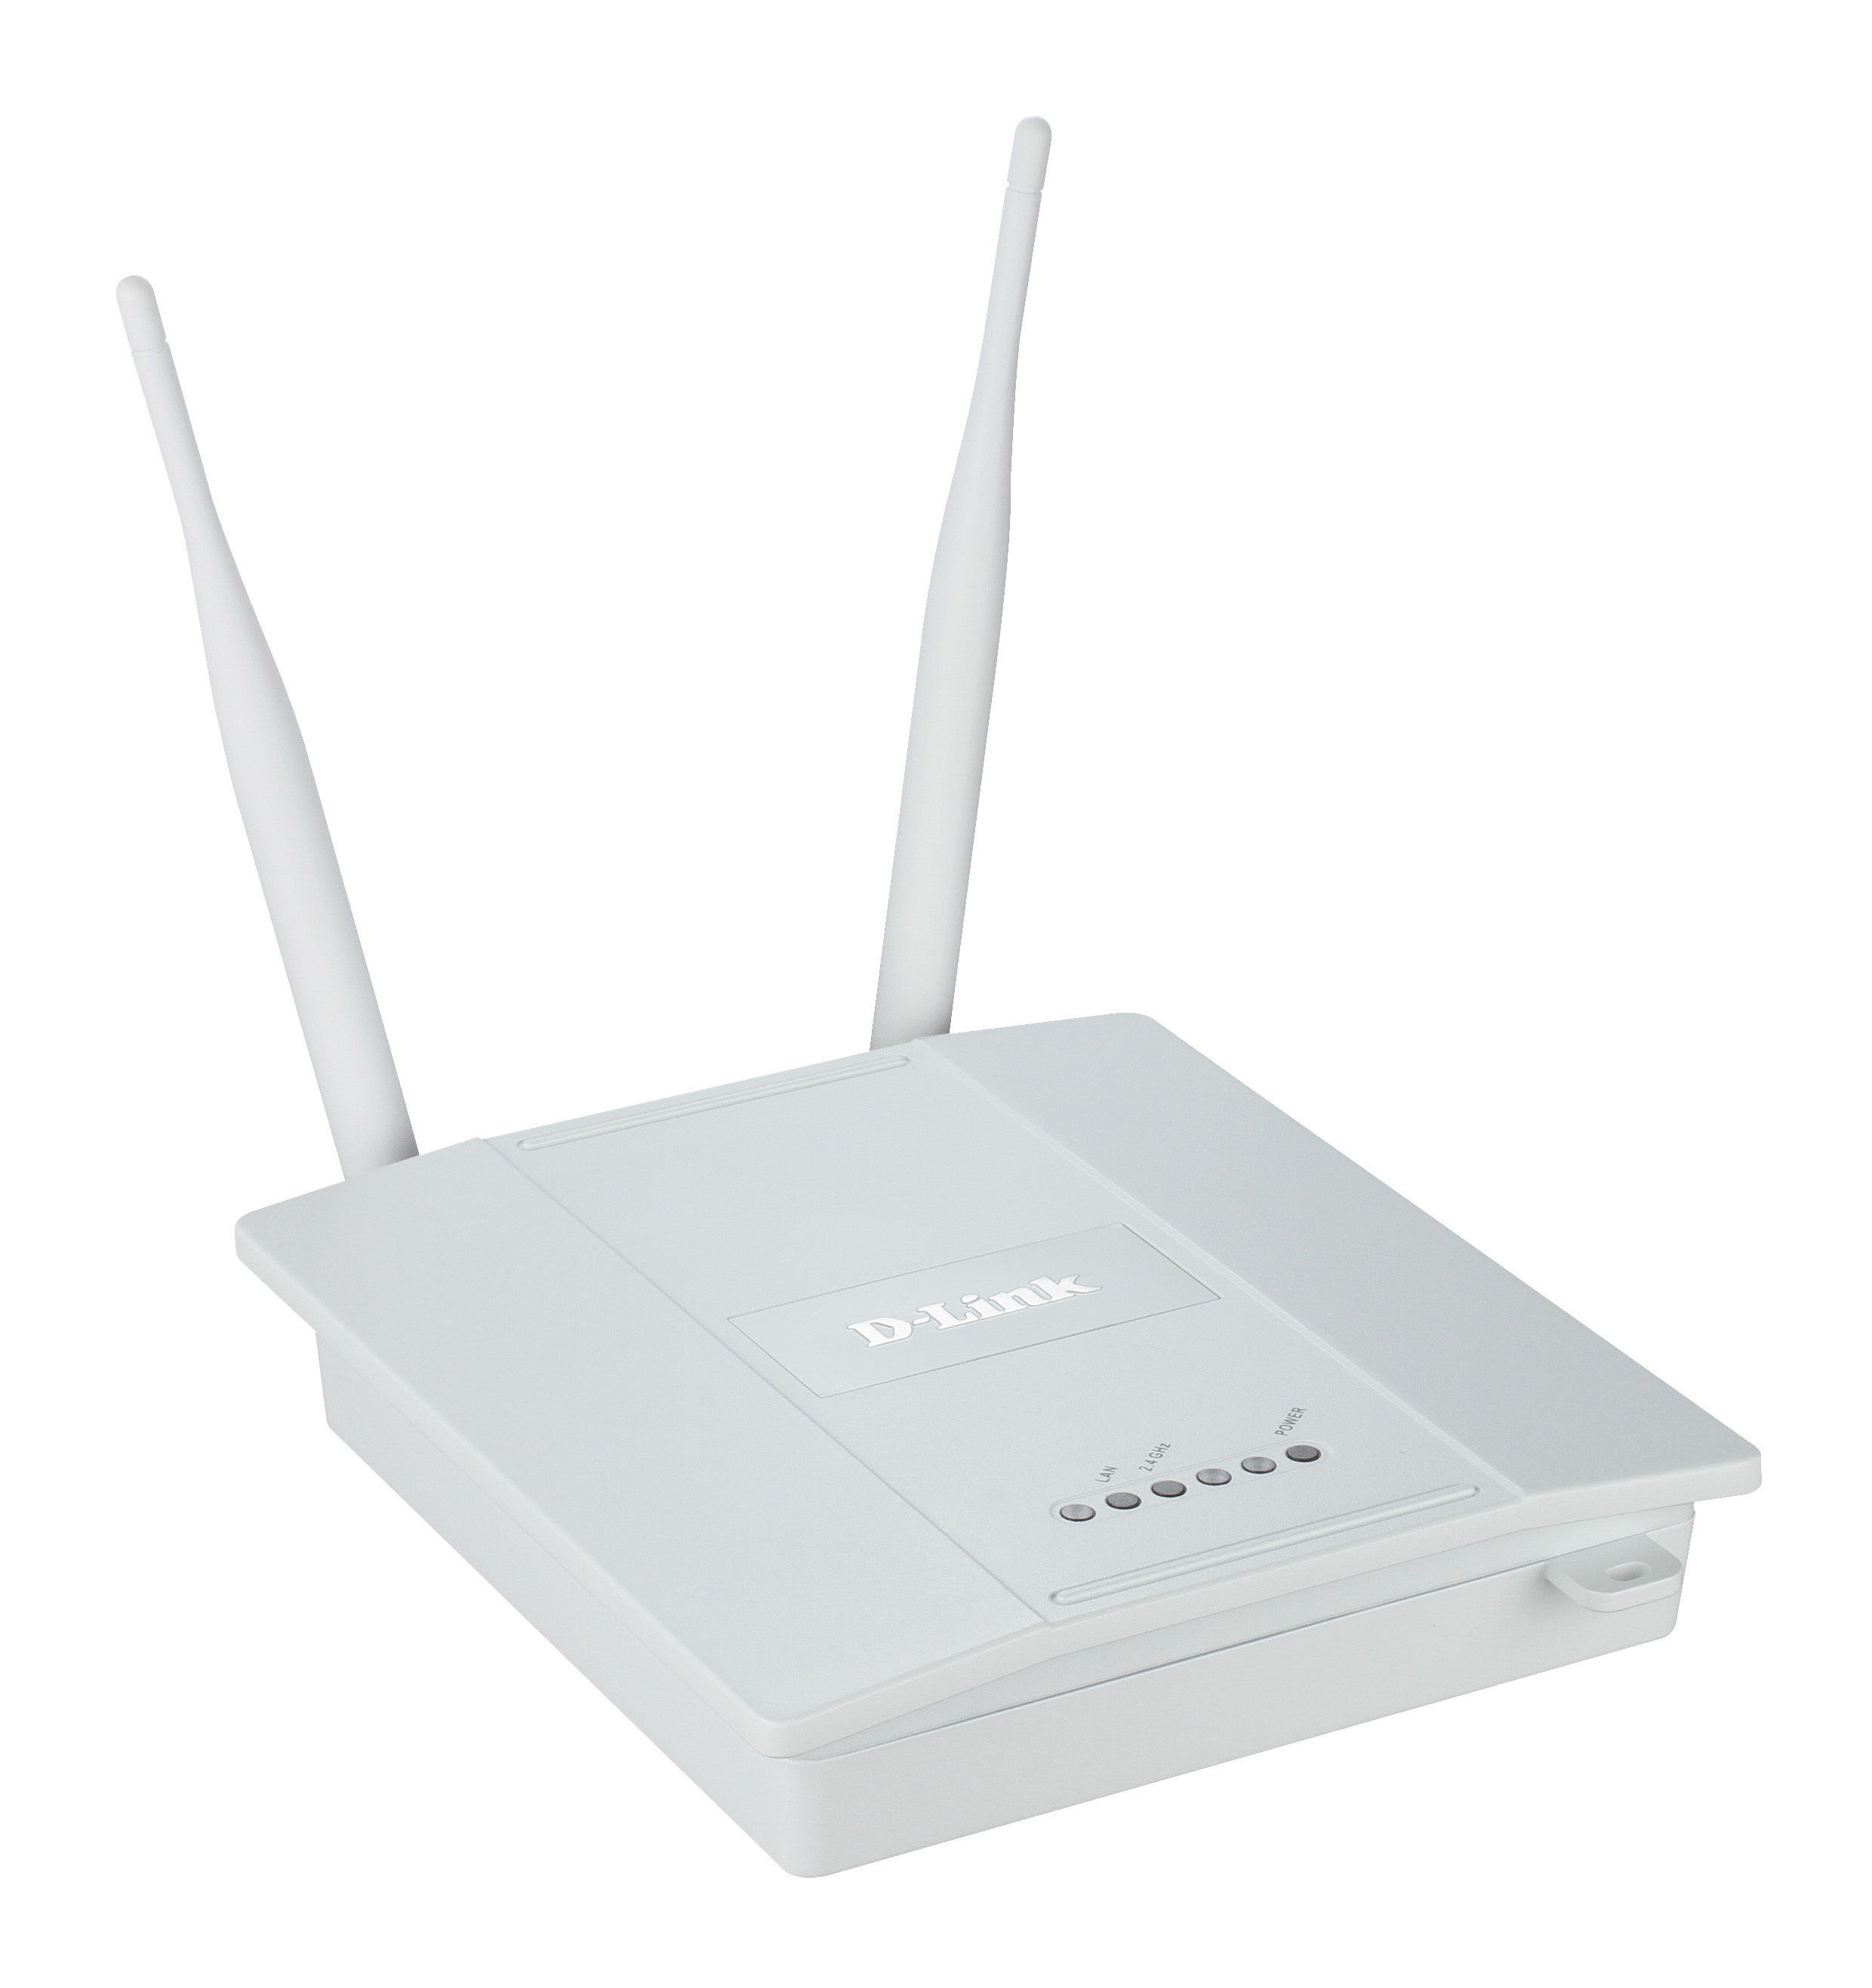 DAP-2360 D-Link AirPremier N PoE Access Point with Plenum-rated Chassis (Refurbished)